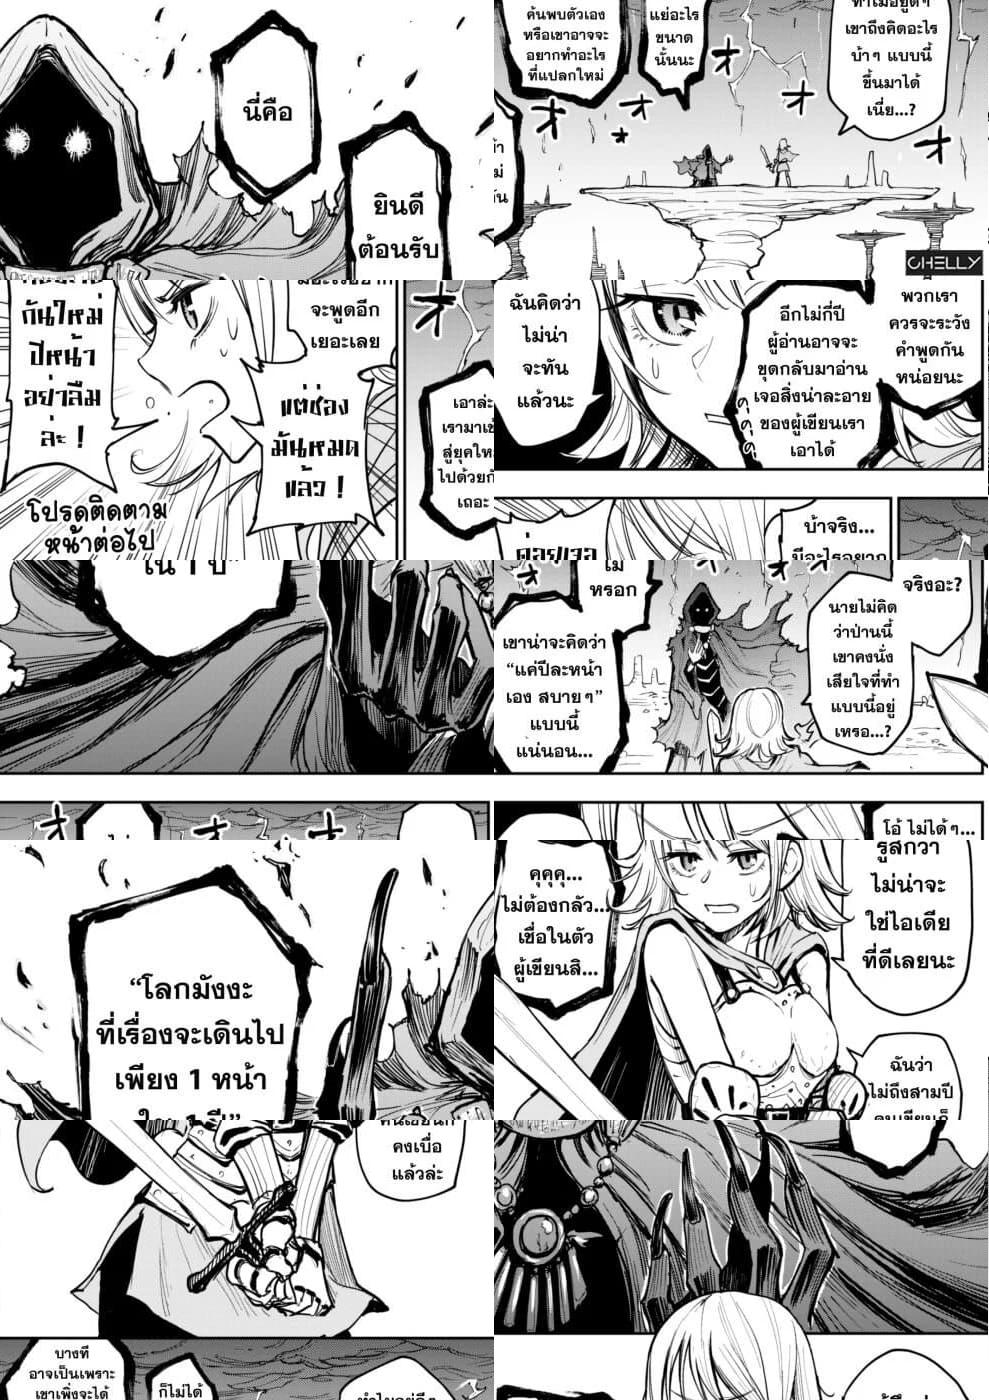 A Manga World That Gets One Page Once A Year 1 1